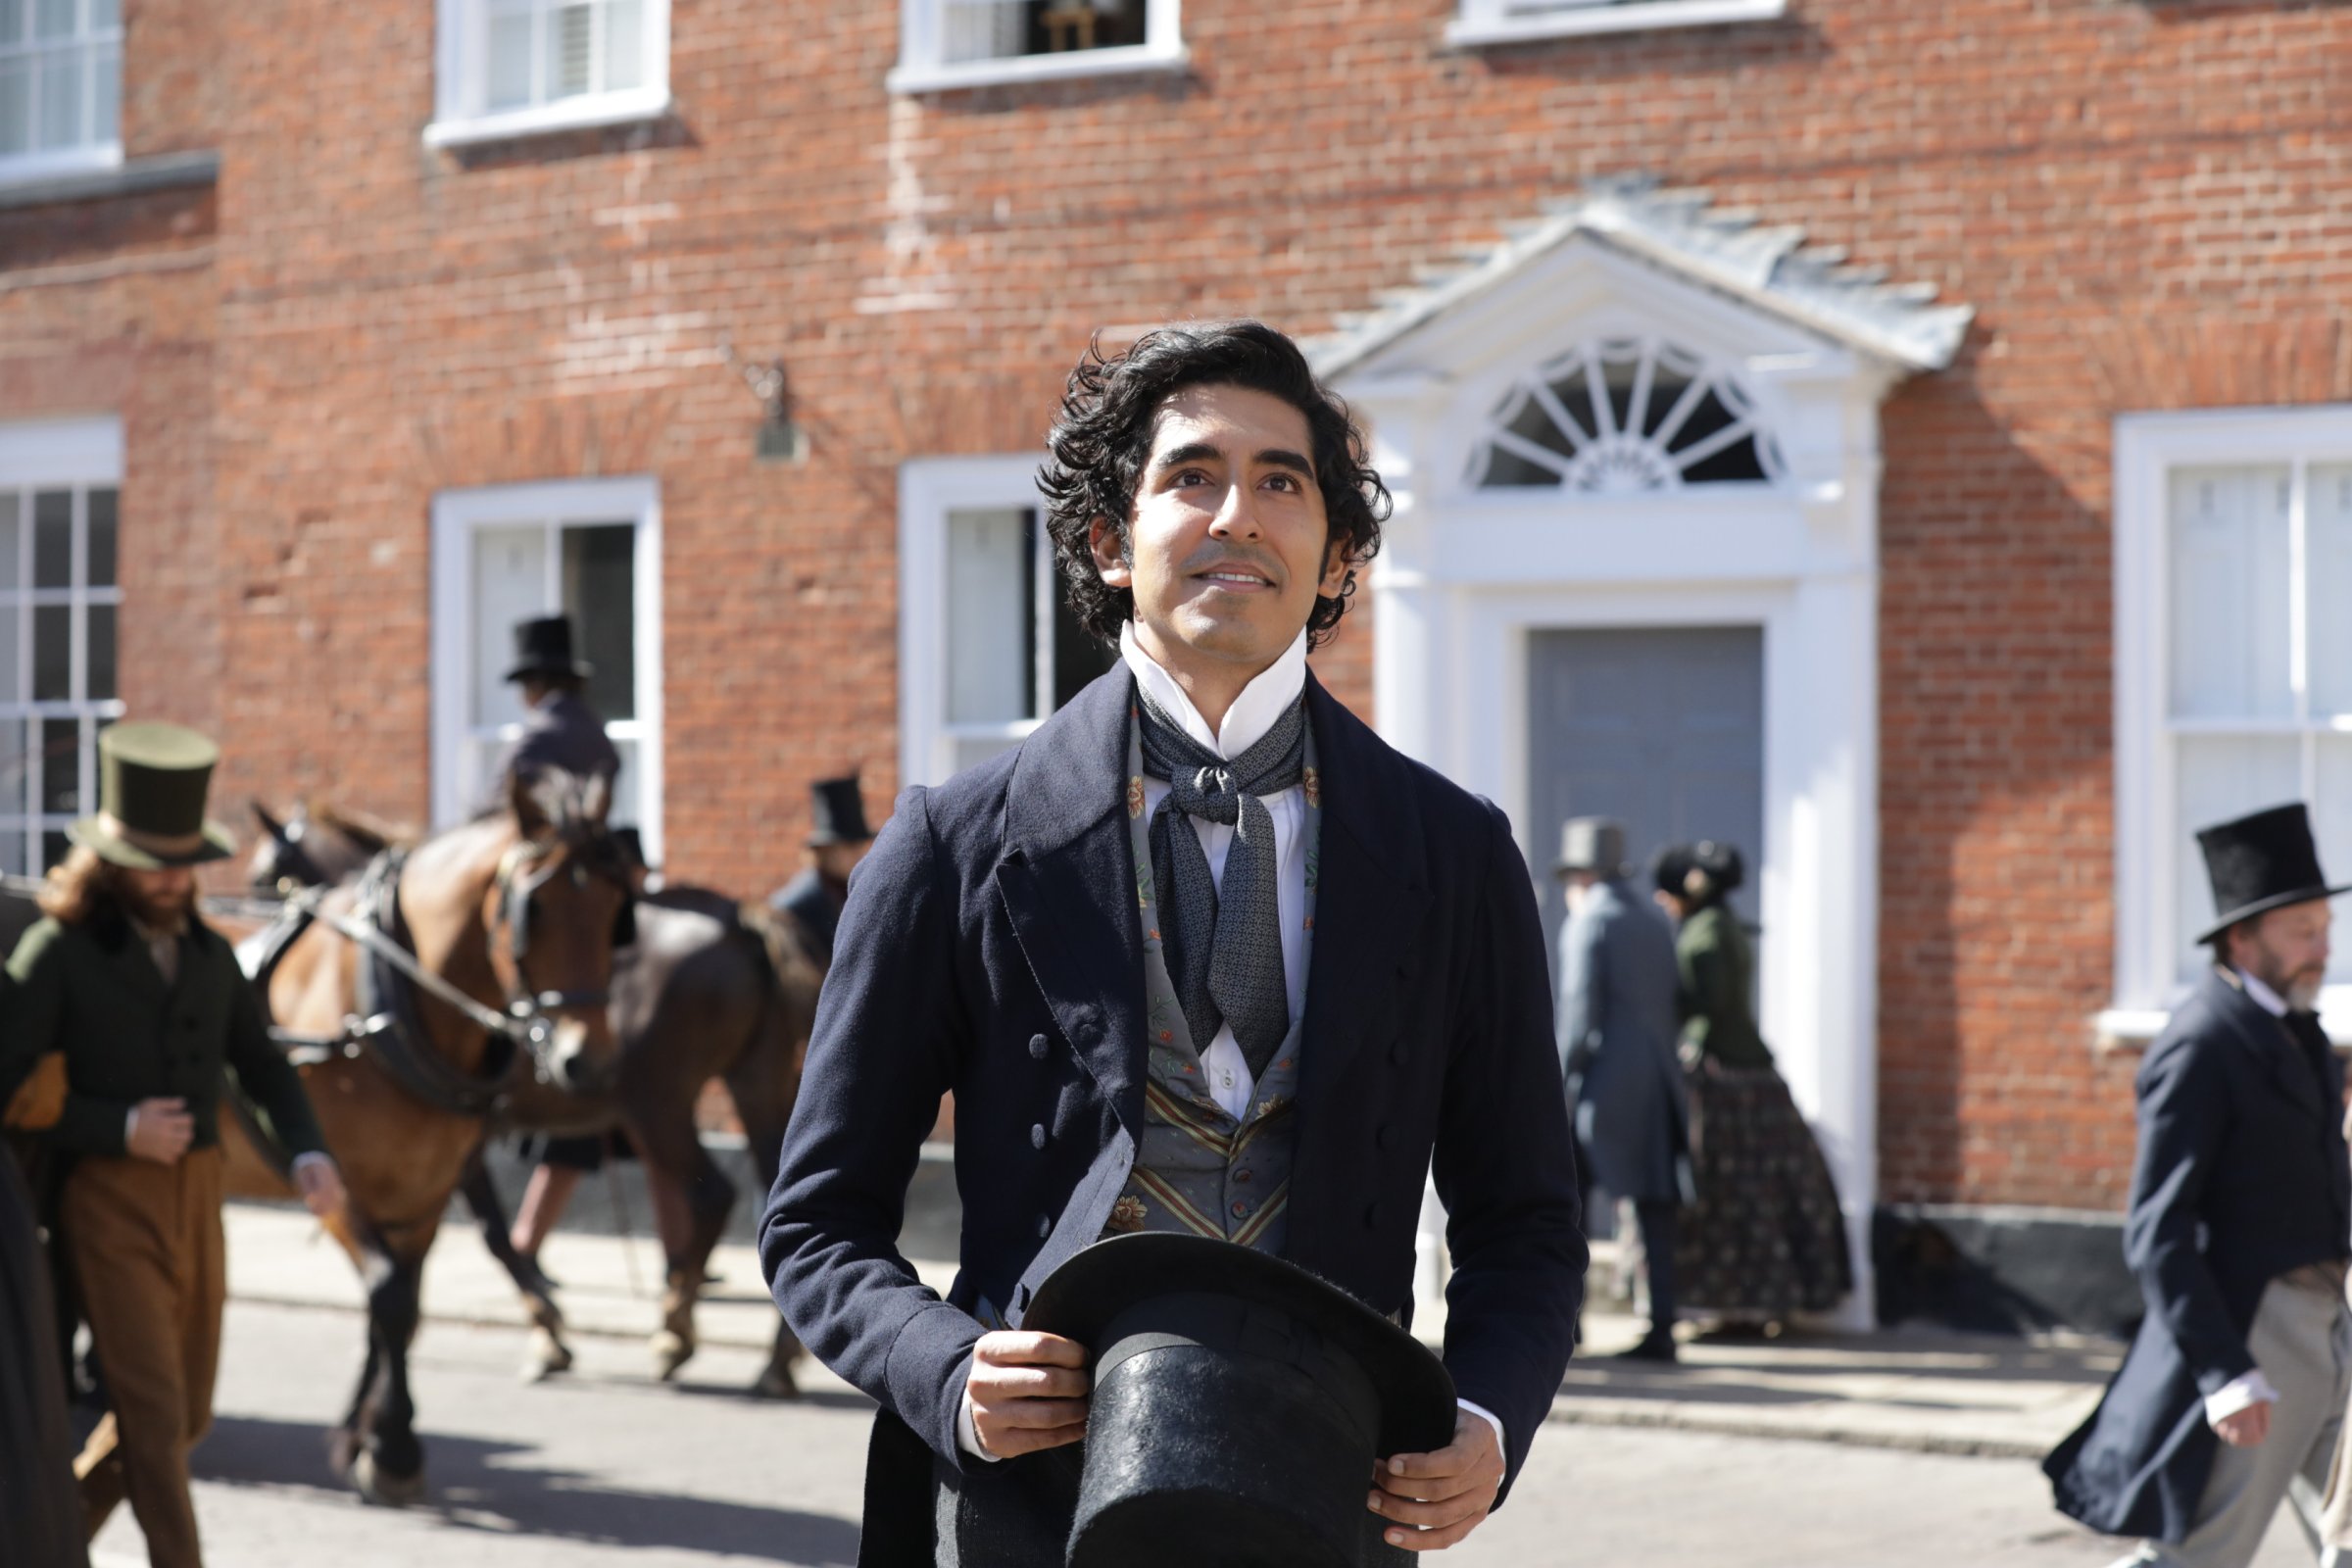 Dev Patel in the film THE PERSONAL HISTORY OF DAVID COPPERFIELD. Photo by Dean Rogers. © 2019 Twentieth Century Fox Film Corporation All Rights Reserved